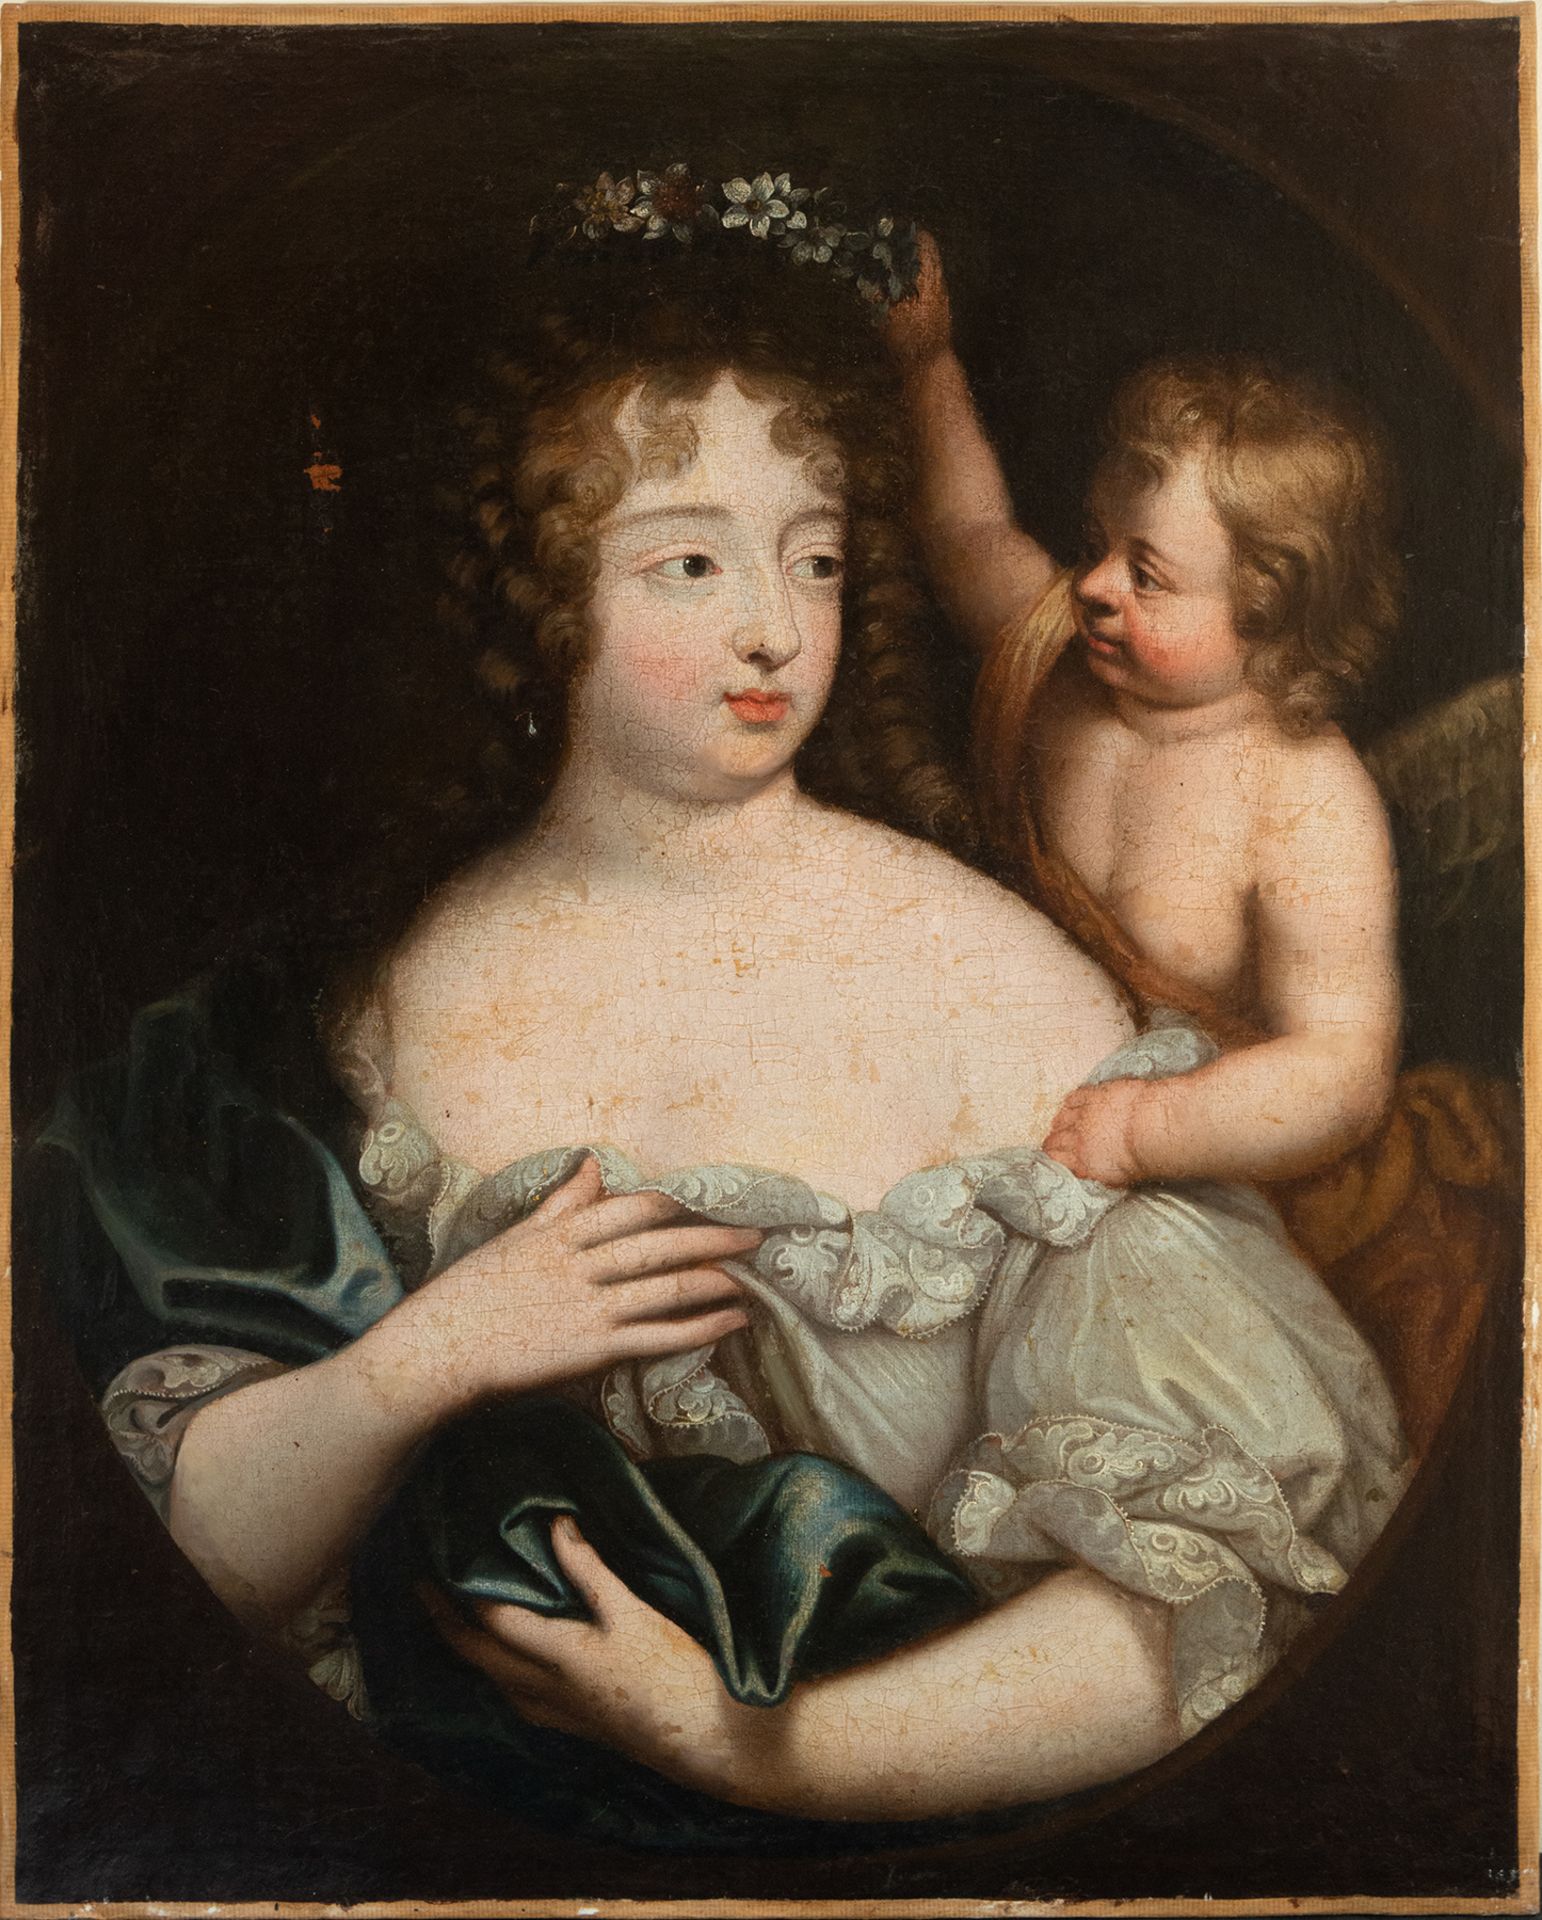 Attributed to the Workshop of Pierre Mignard, Madamme de Montespan being crowned in her Beauty by Cu